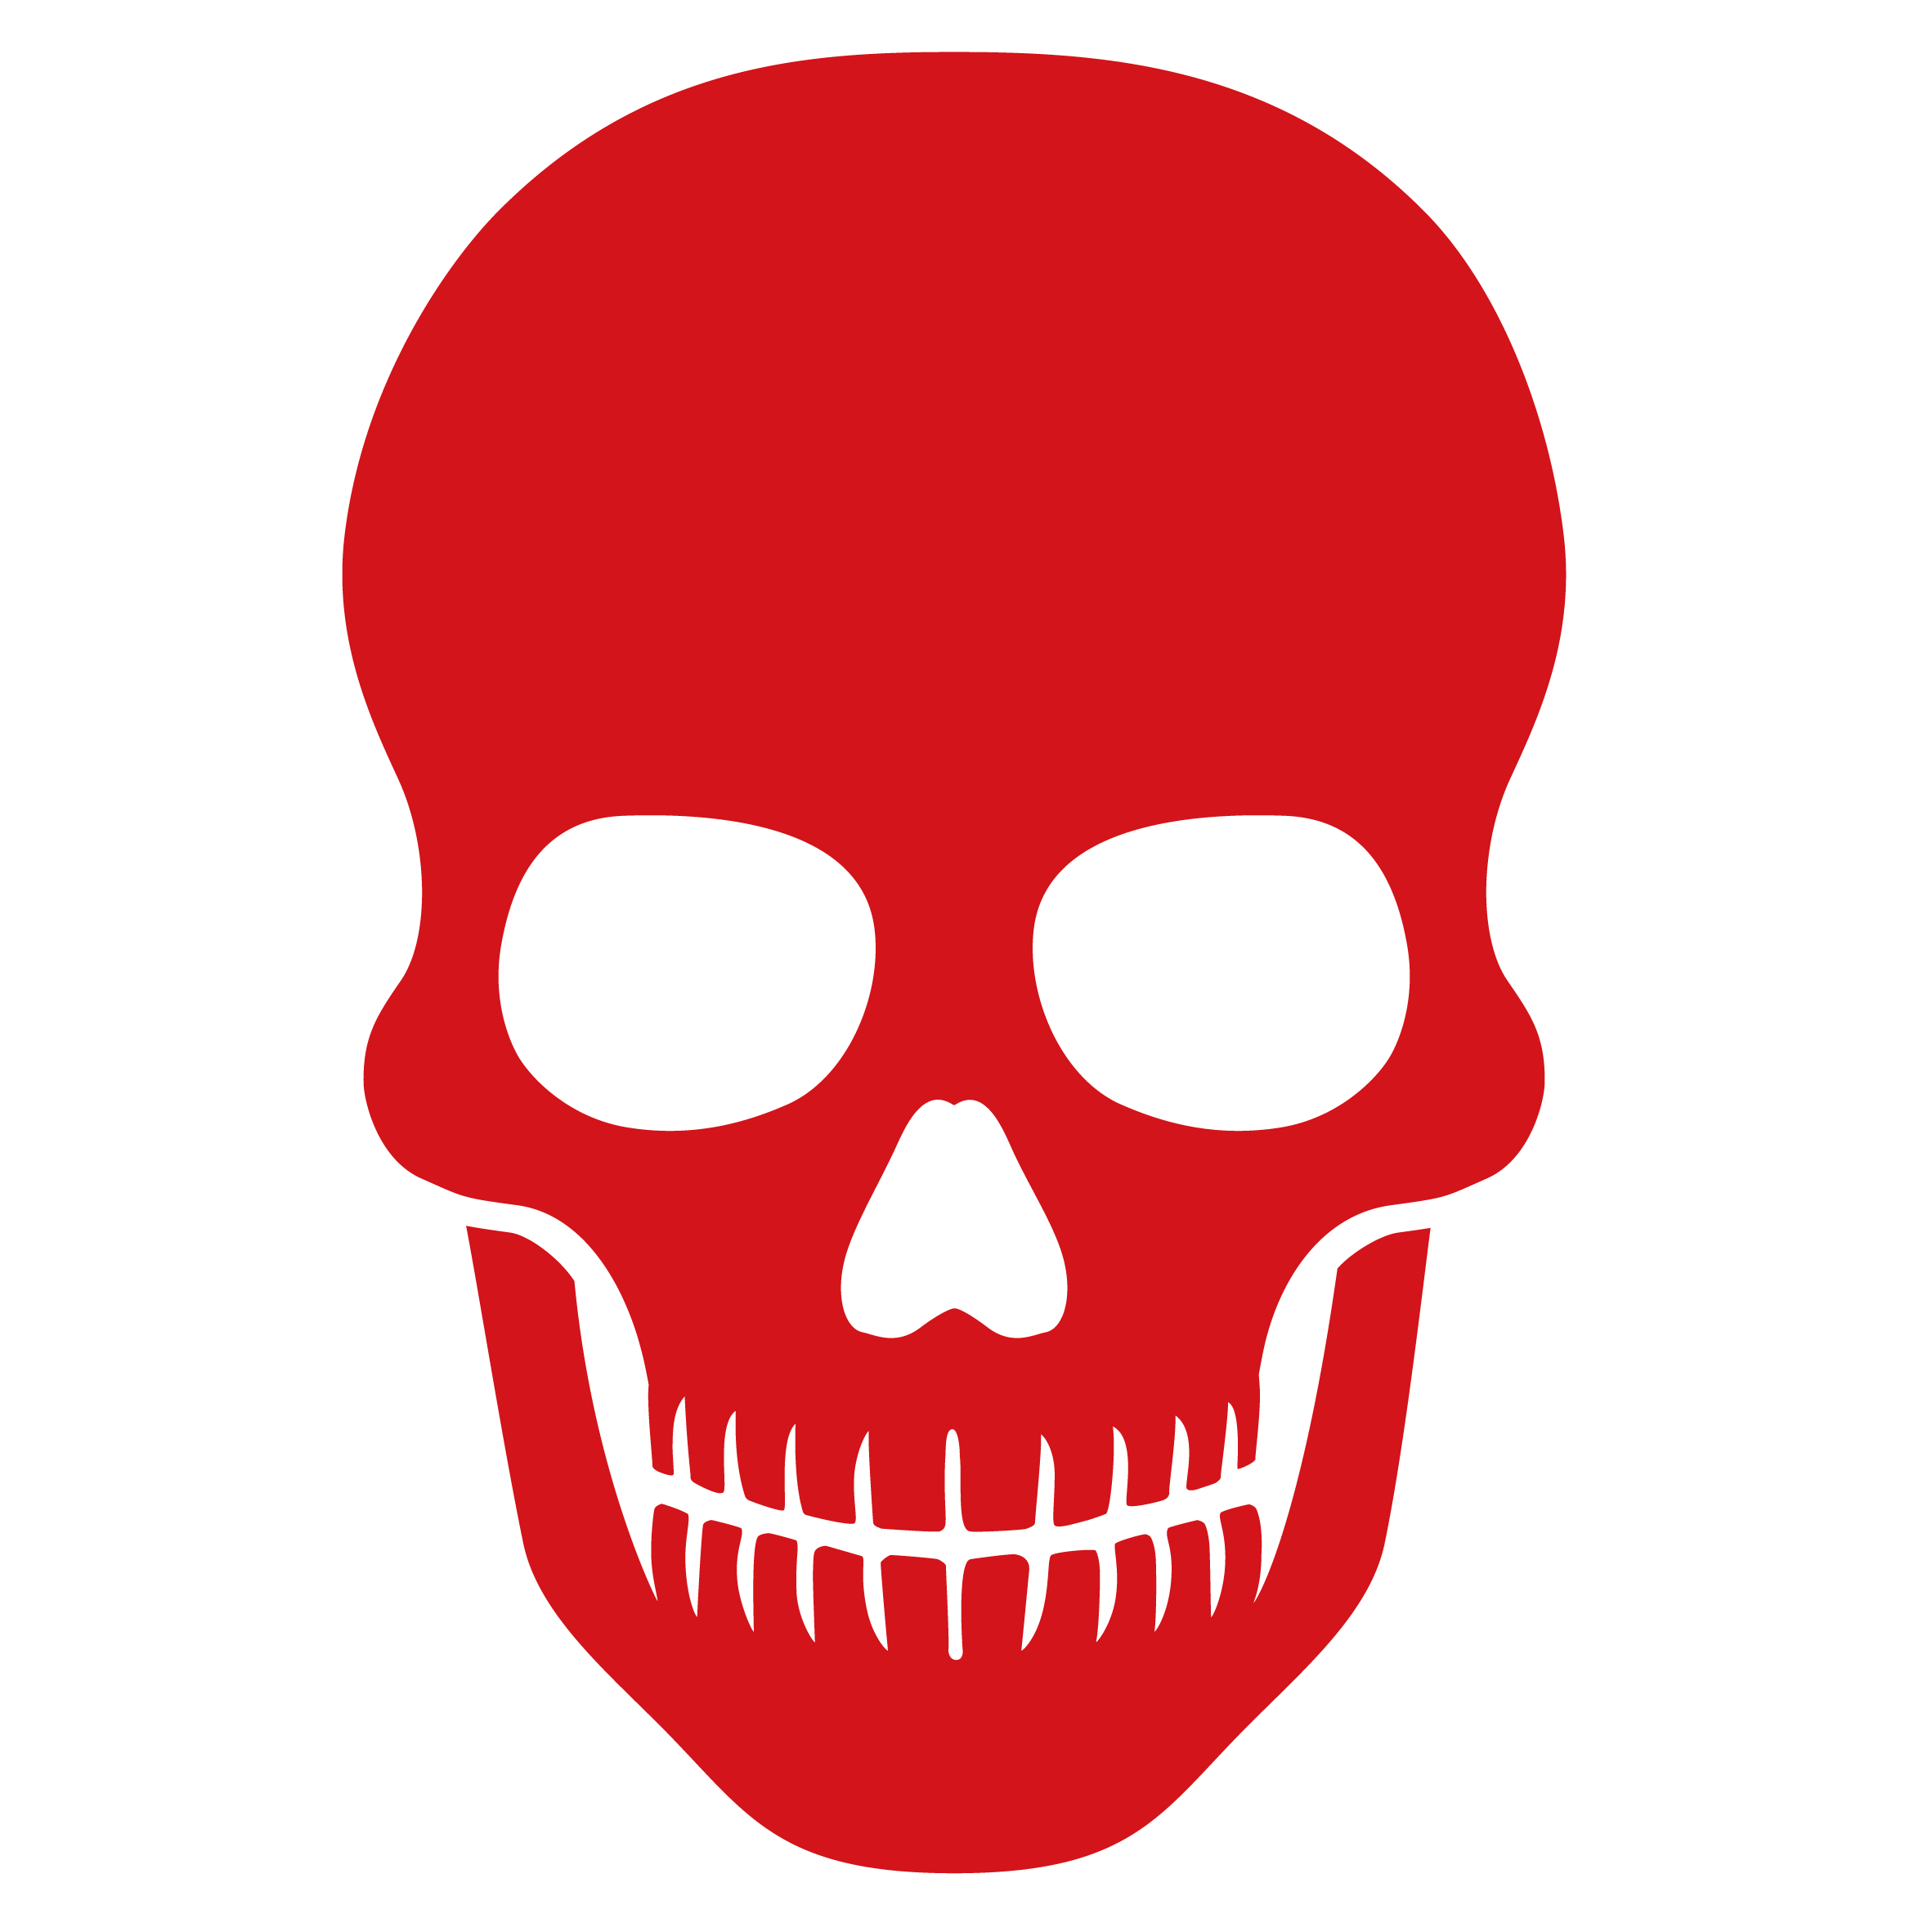 Human remains icon